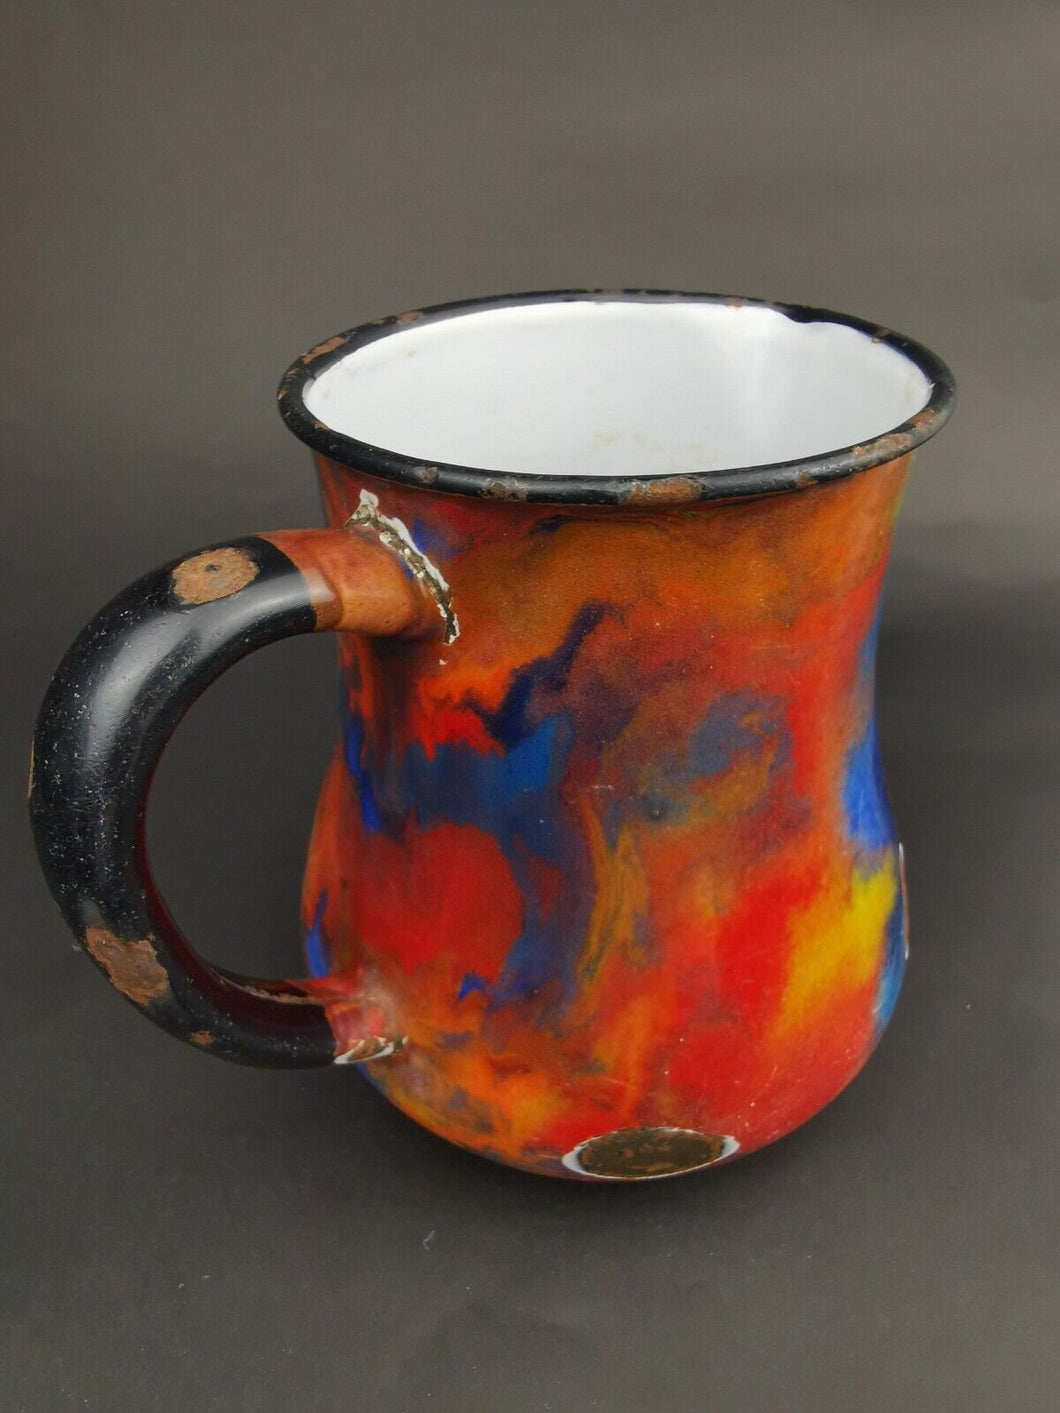 Antique Enamel and Metal Pitcher Jug Enamel Ware End of Day Rainbow Multicolored Rare French Early 1900's Original